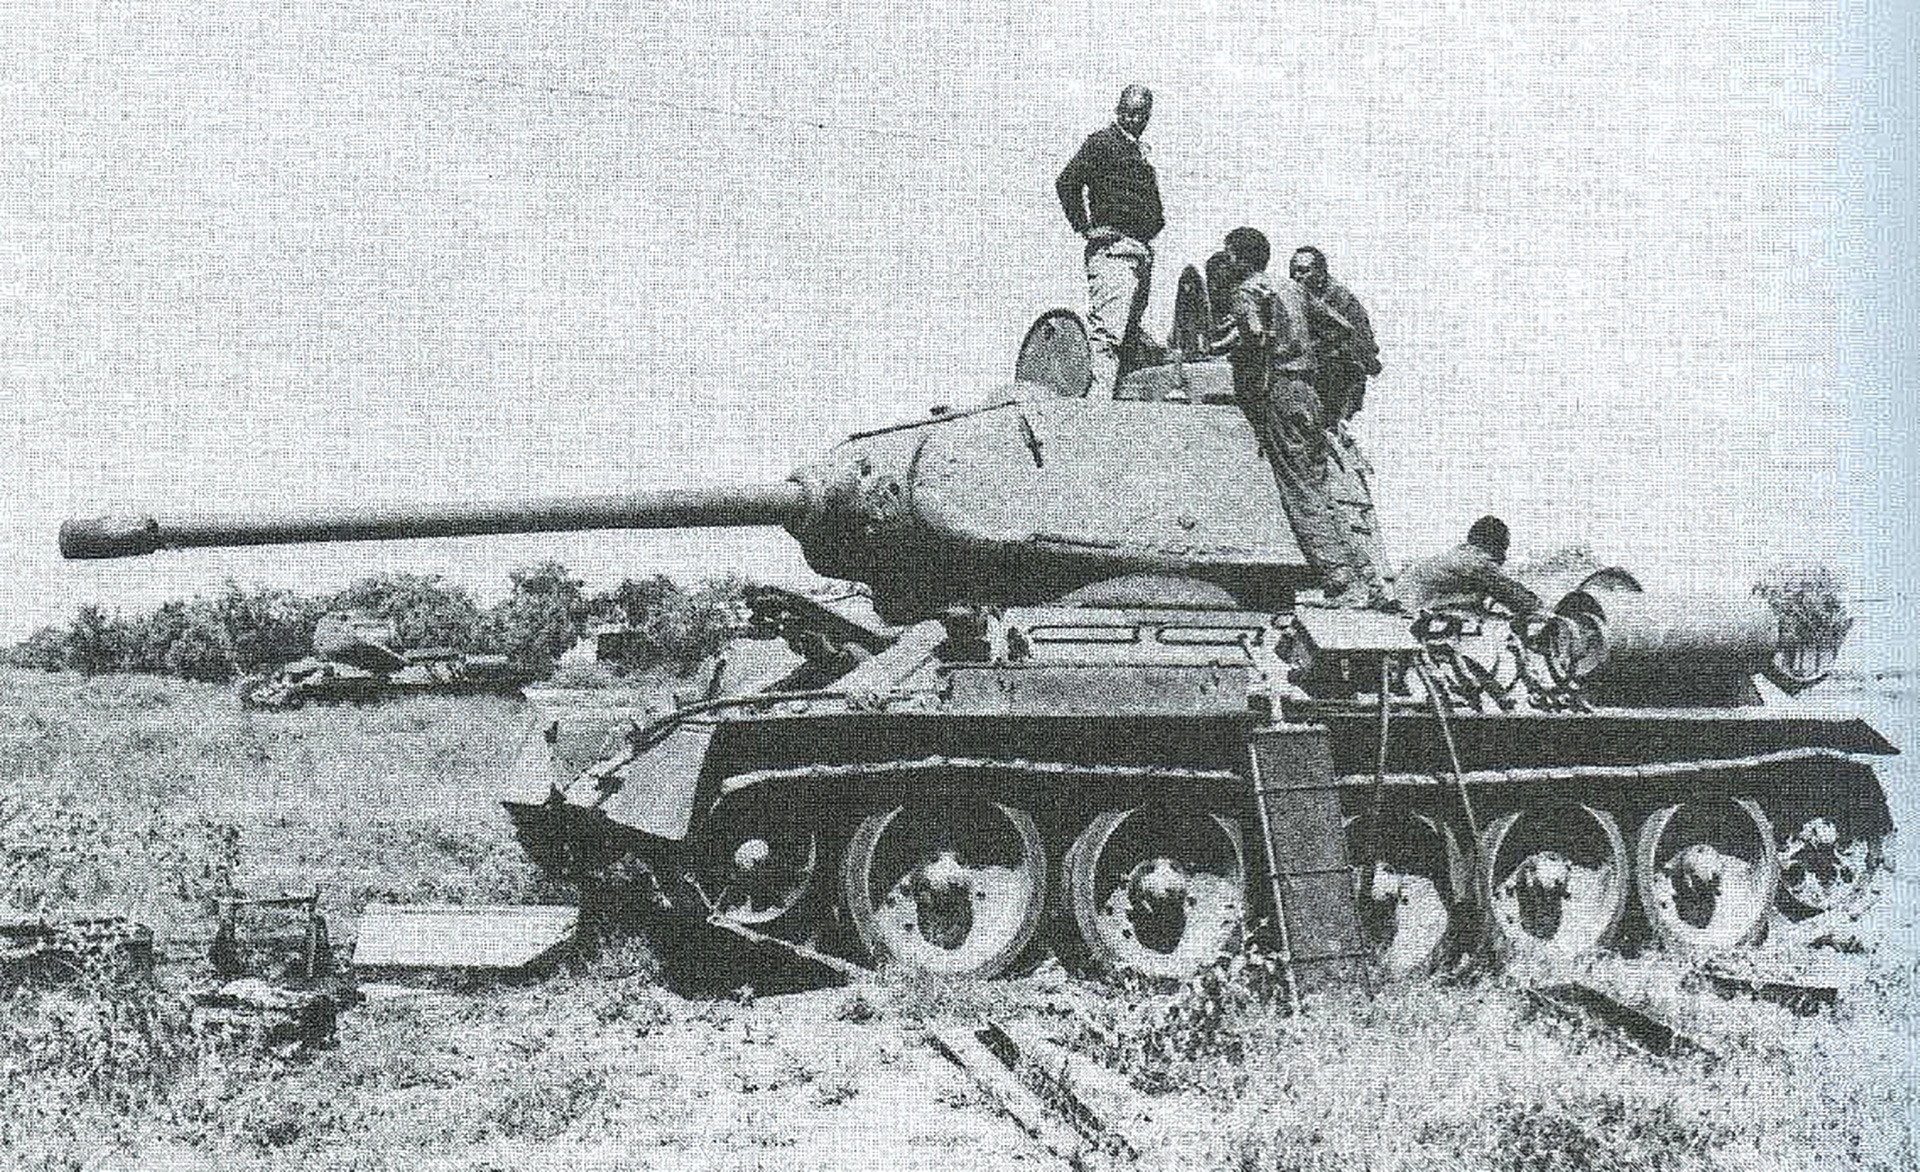 A heavily damaged Somali National Army T-34 going through repairs.